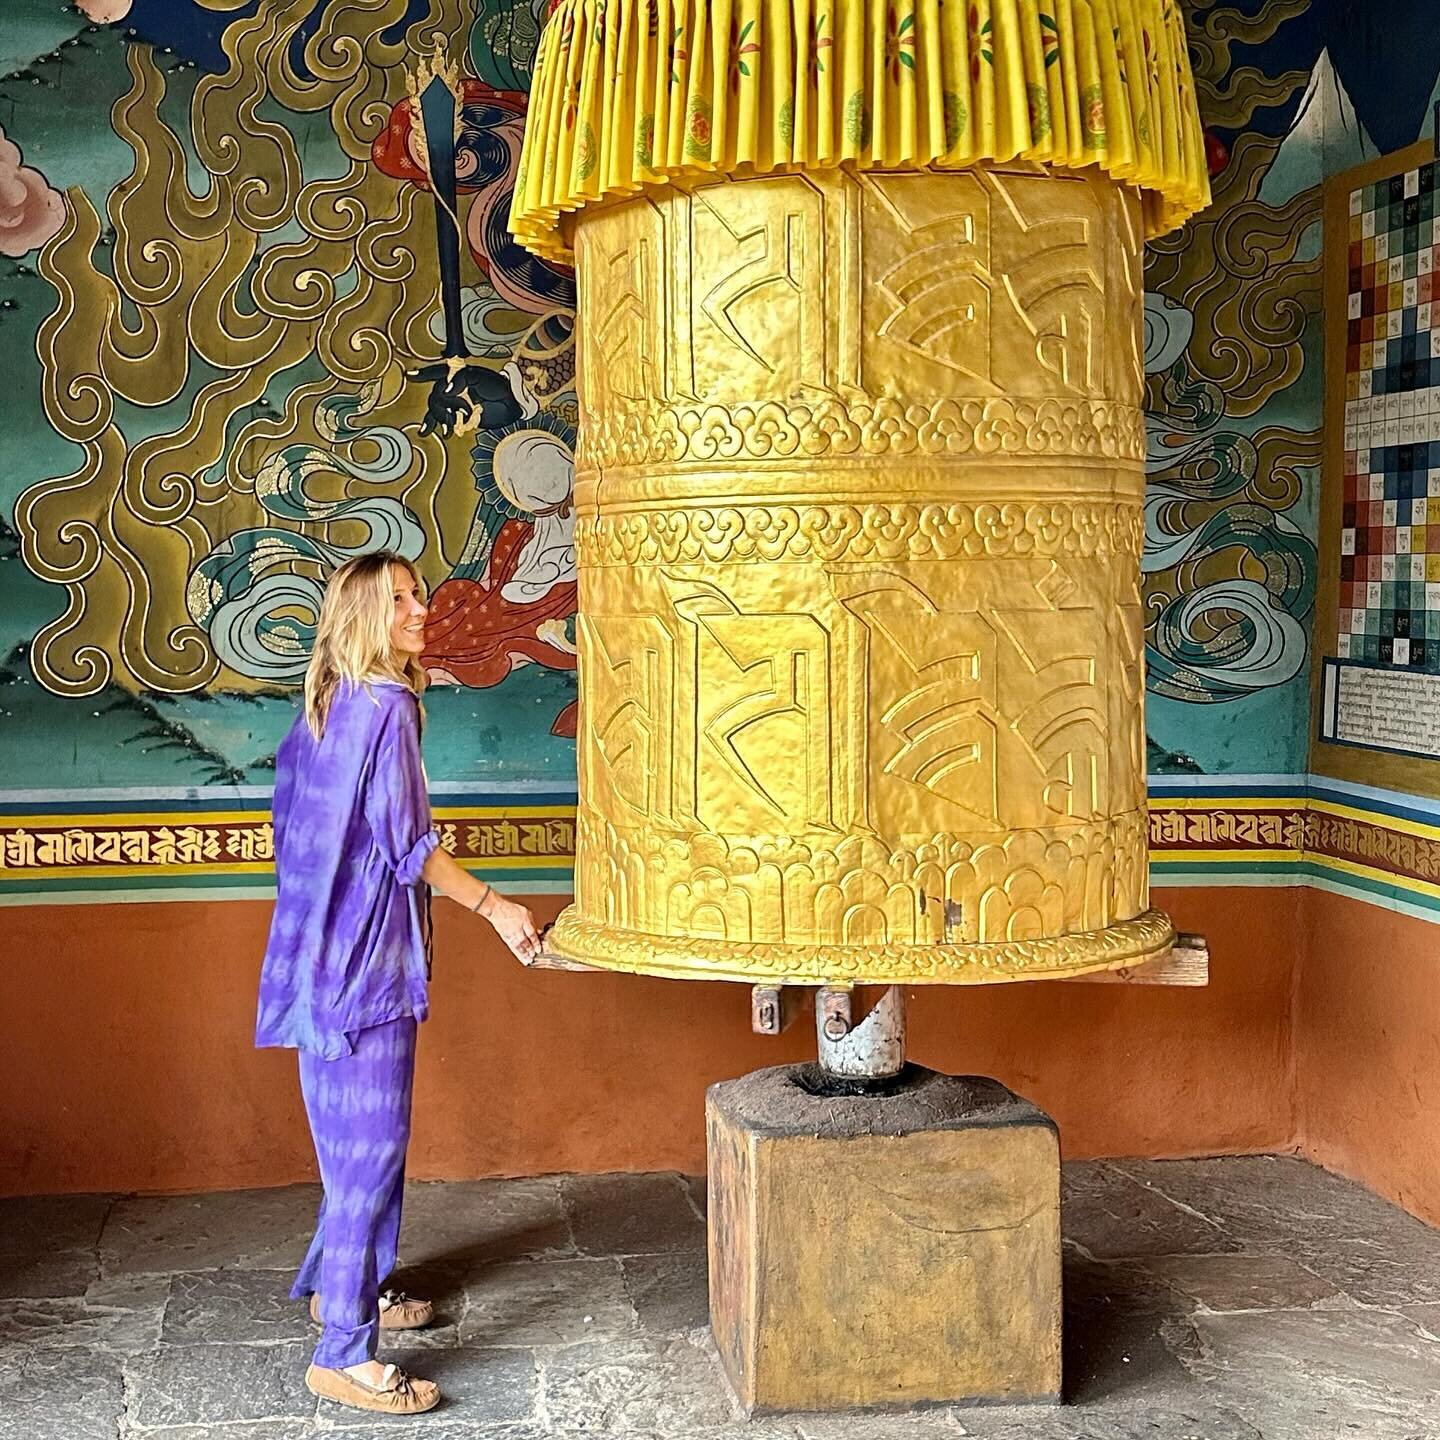 After a long social media cleanse, I&rsquo;m excited to be back in this digital universe🤓🥰 

🫶🏽Photo dropping from an extraordinary pilgrimage in Bhutan the last months with my amazing mother, teacher @dr.nidachenagtsang and @ianbaker108 diving i